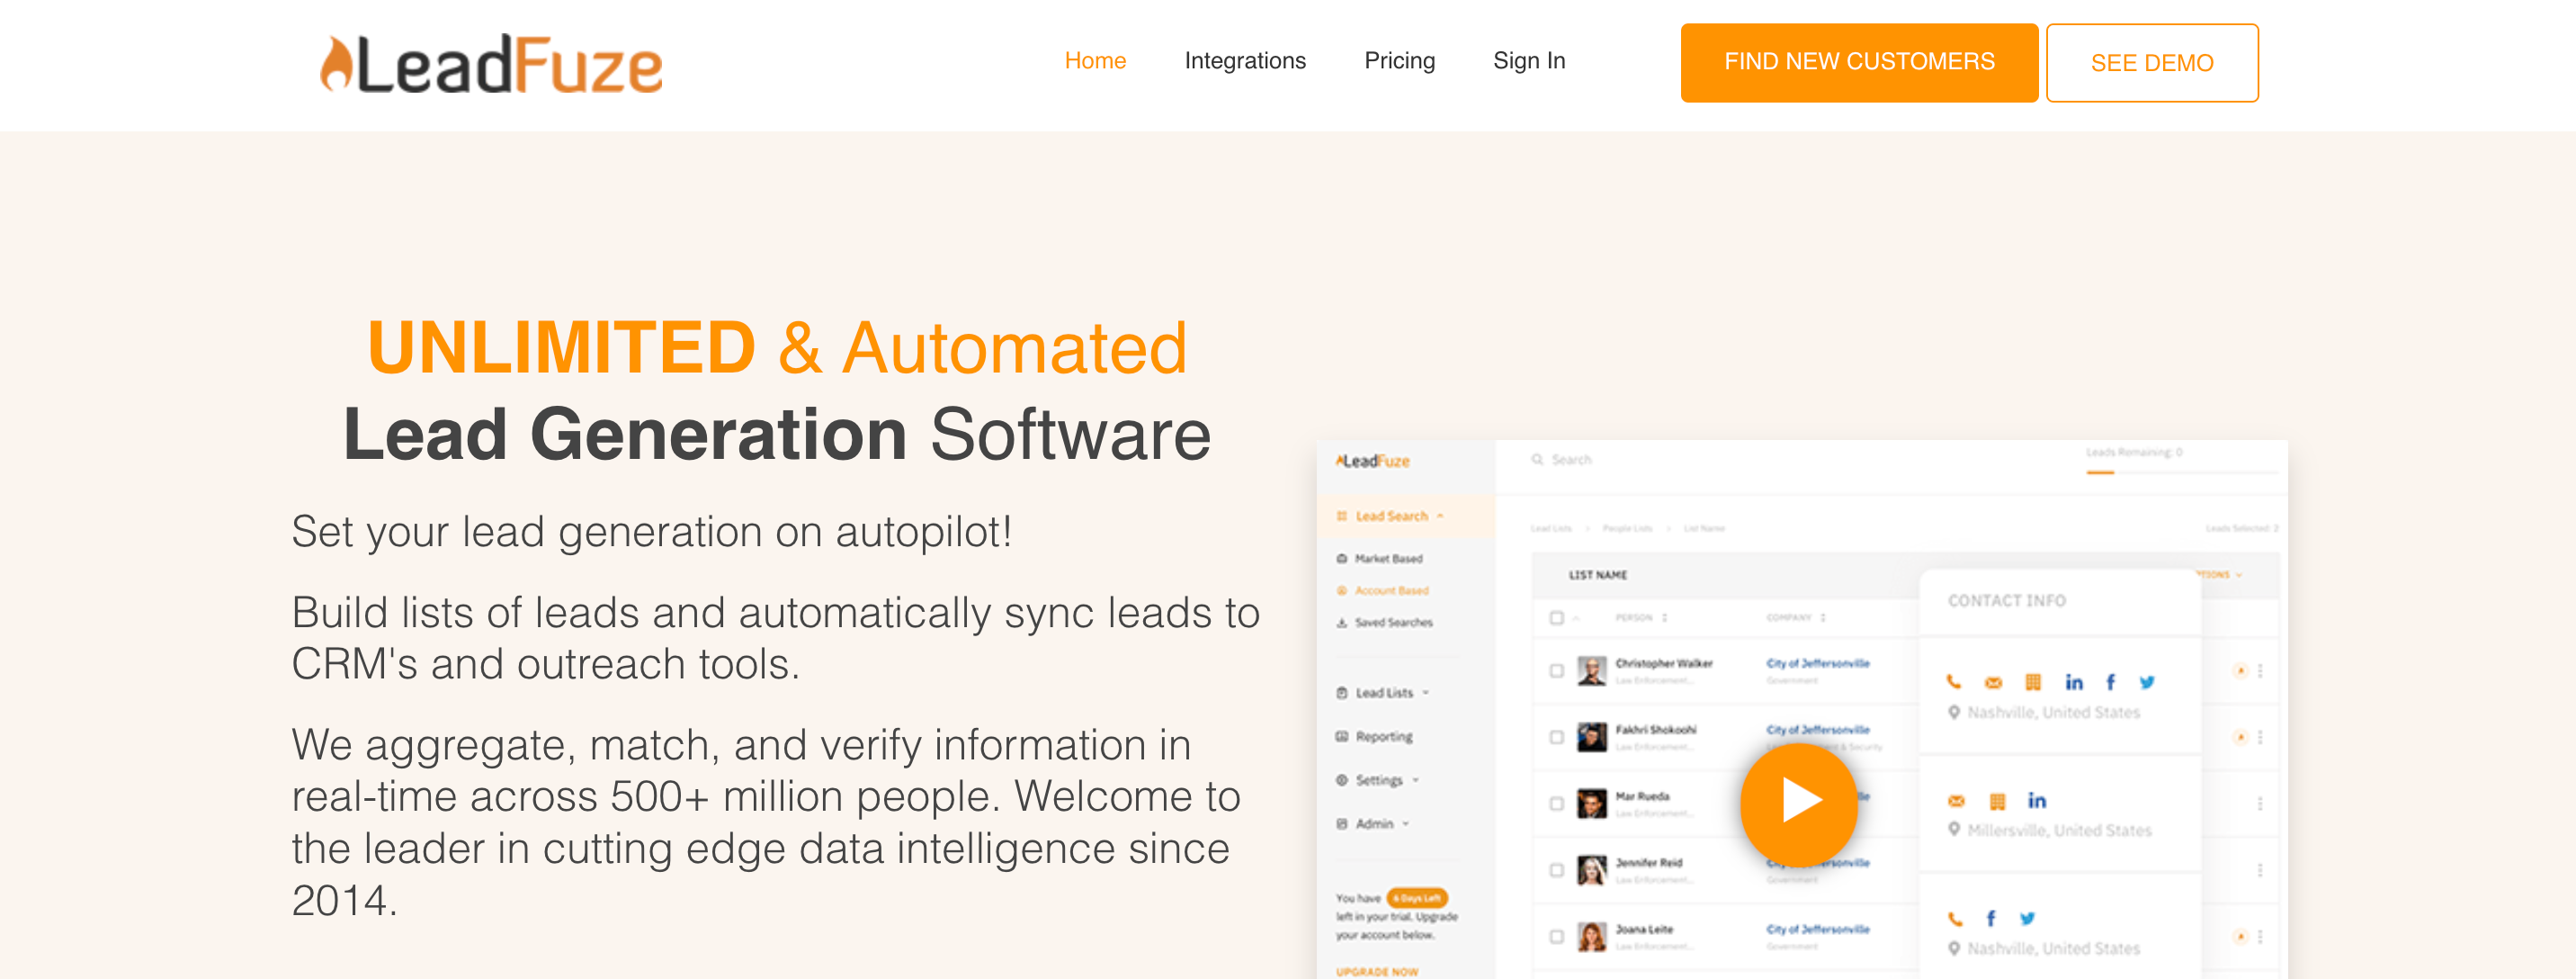 LeadFuze an automated Lead Generation software.